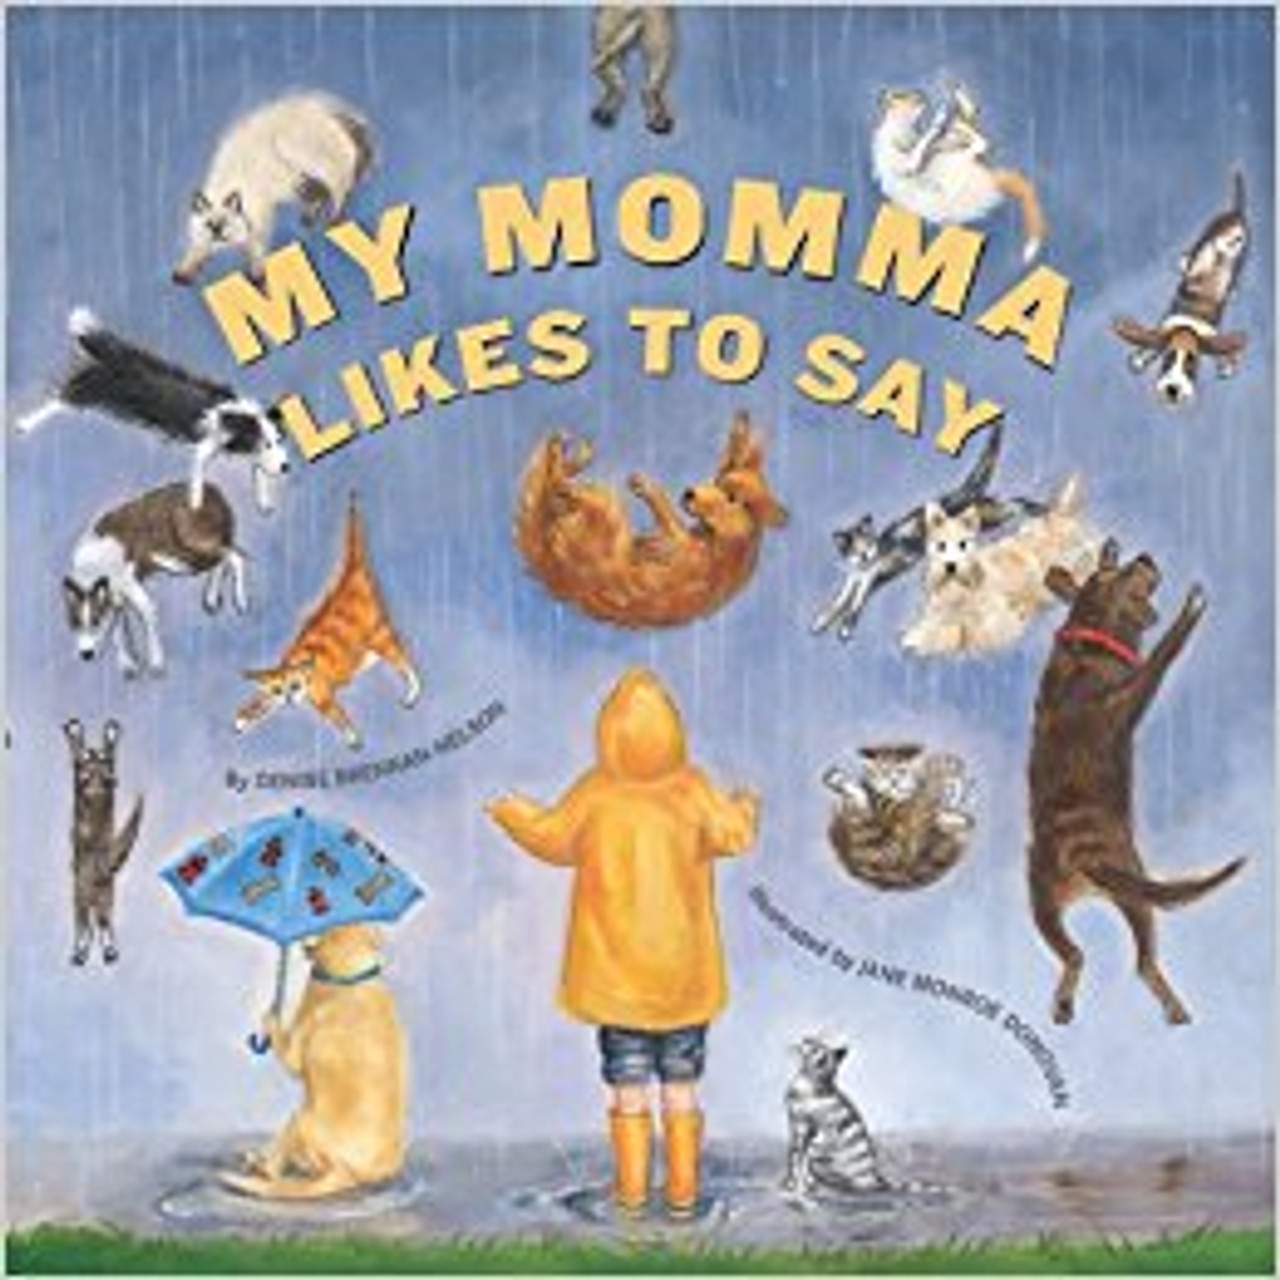 My Momma Likes to Say by Denise Brennan-Nelson